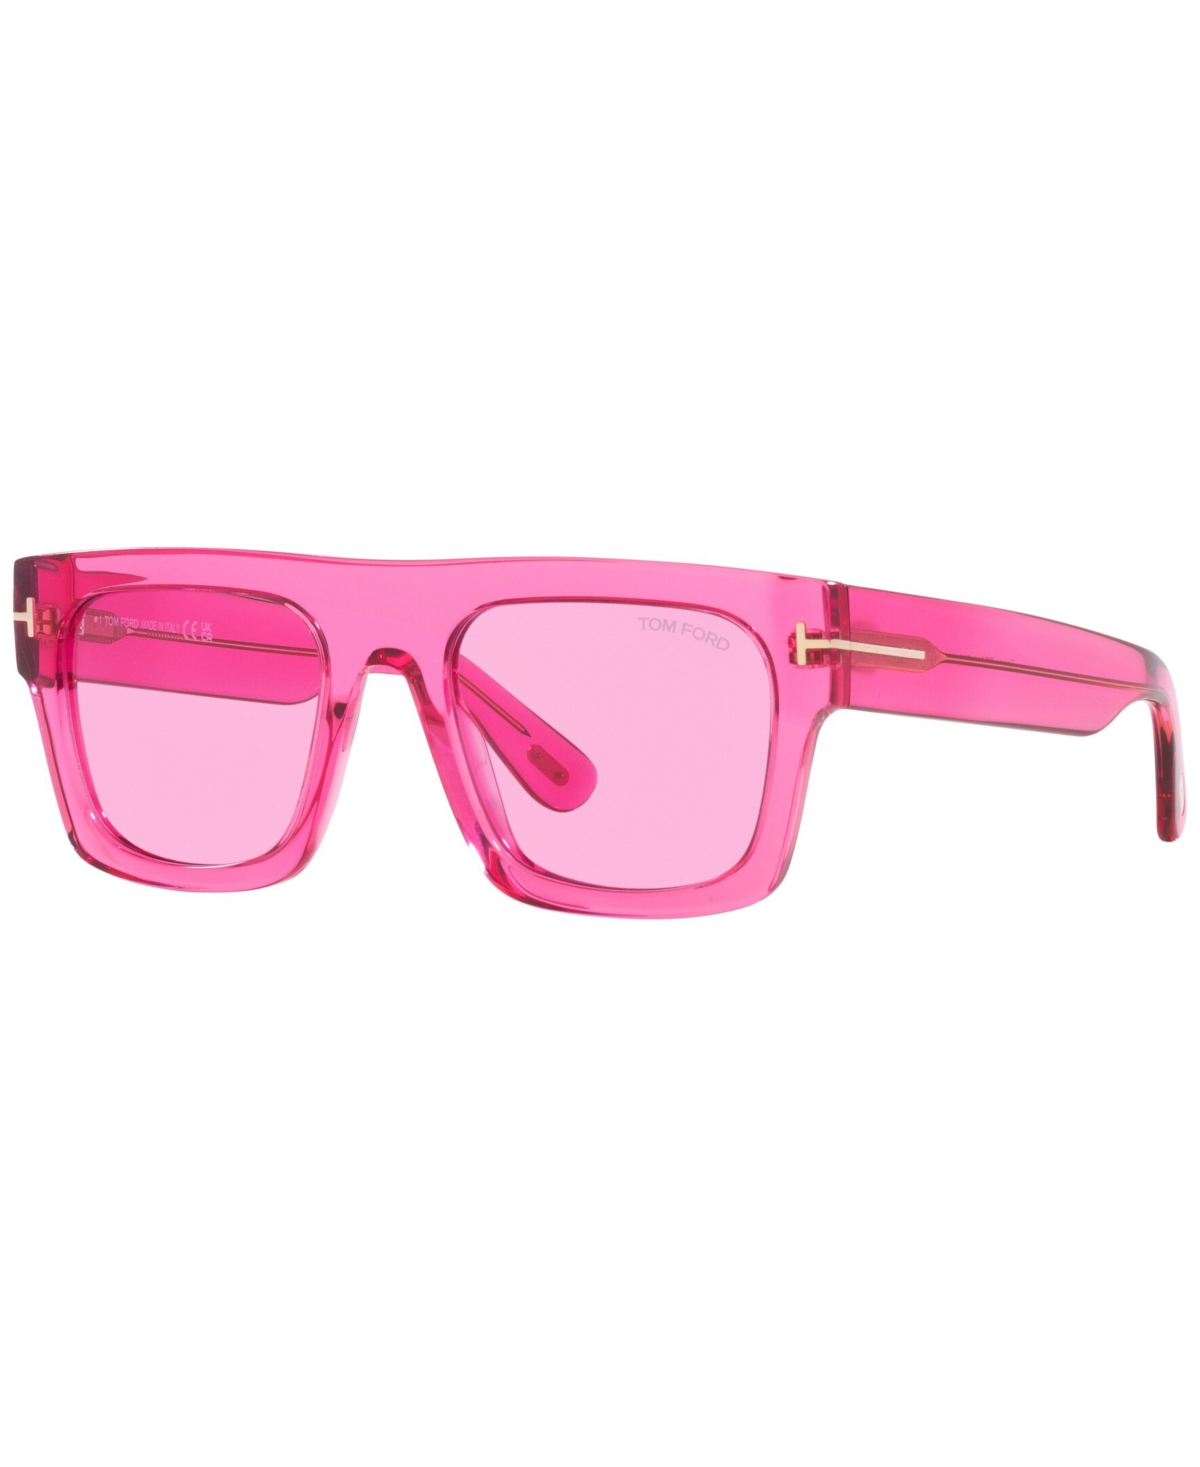 Tom Ford Mann Sunglass Ft0711 In Pink